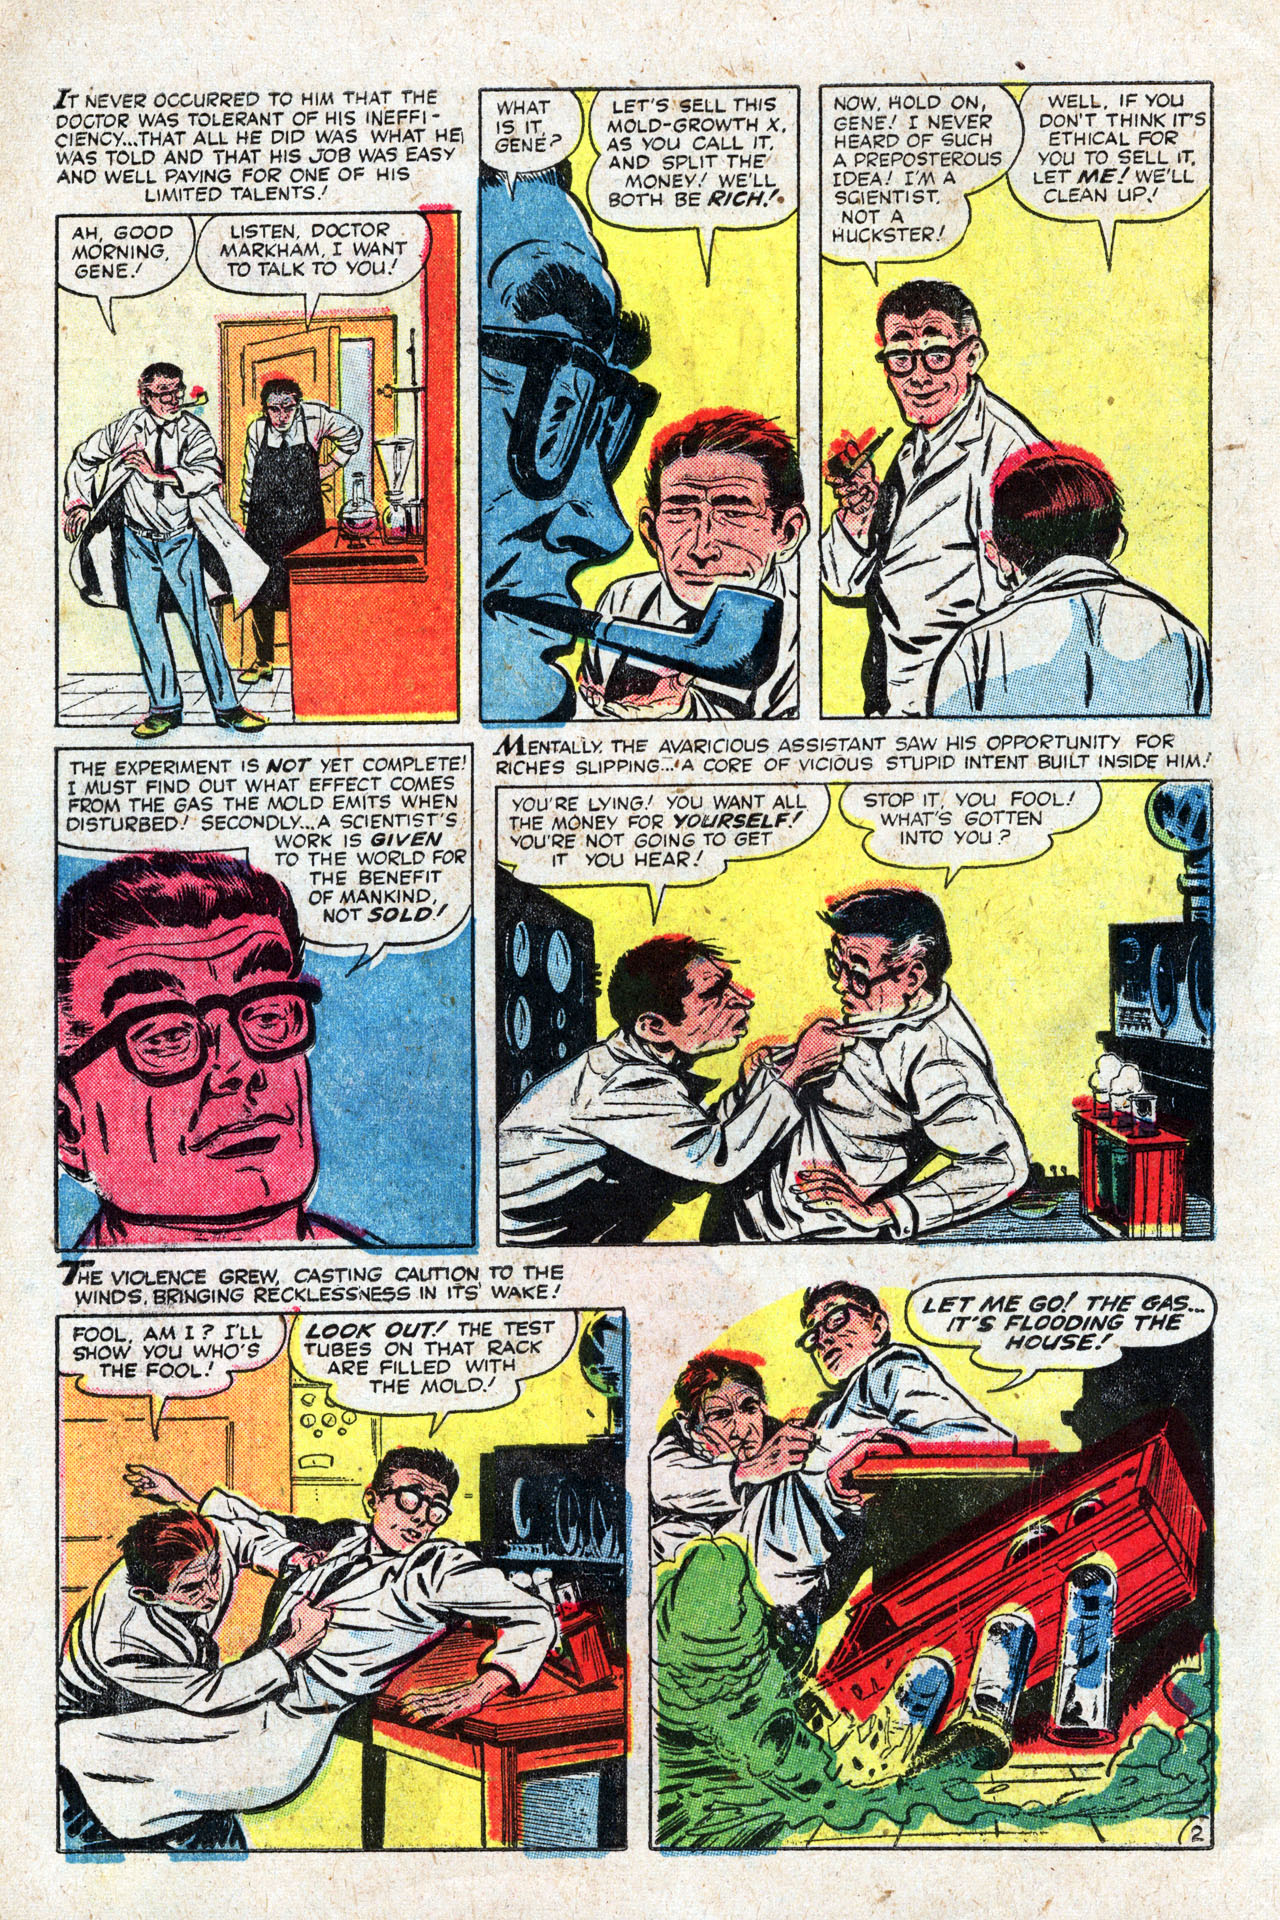 Marvel Tales (1949) 150 Page 13